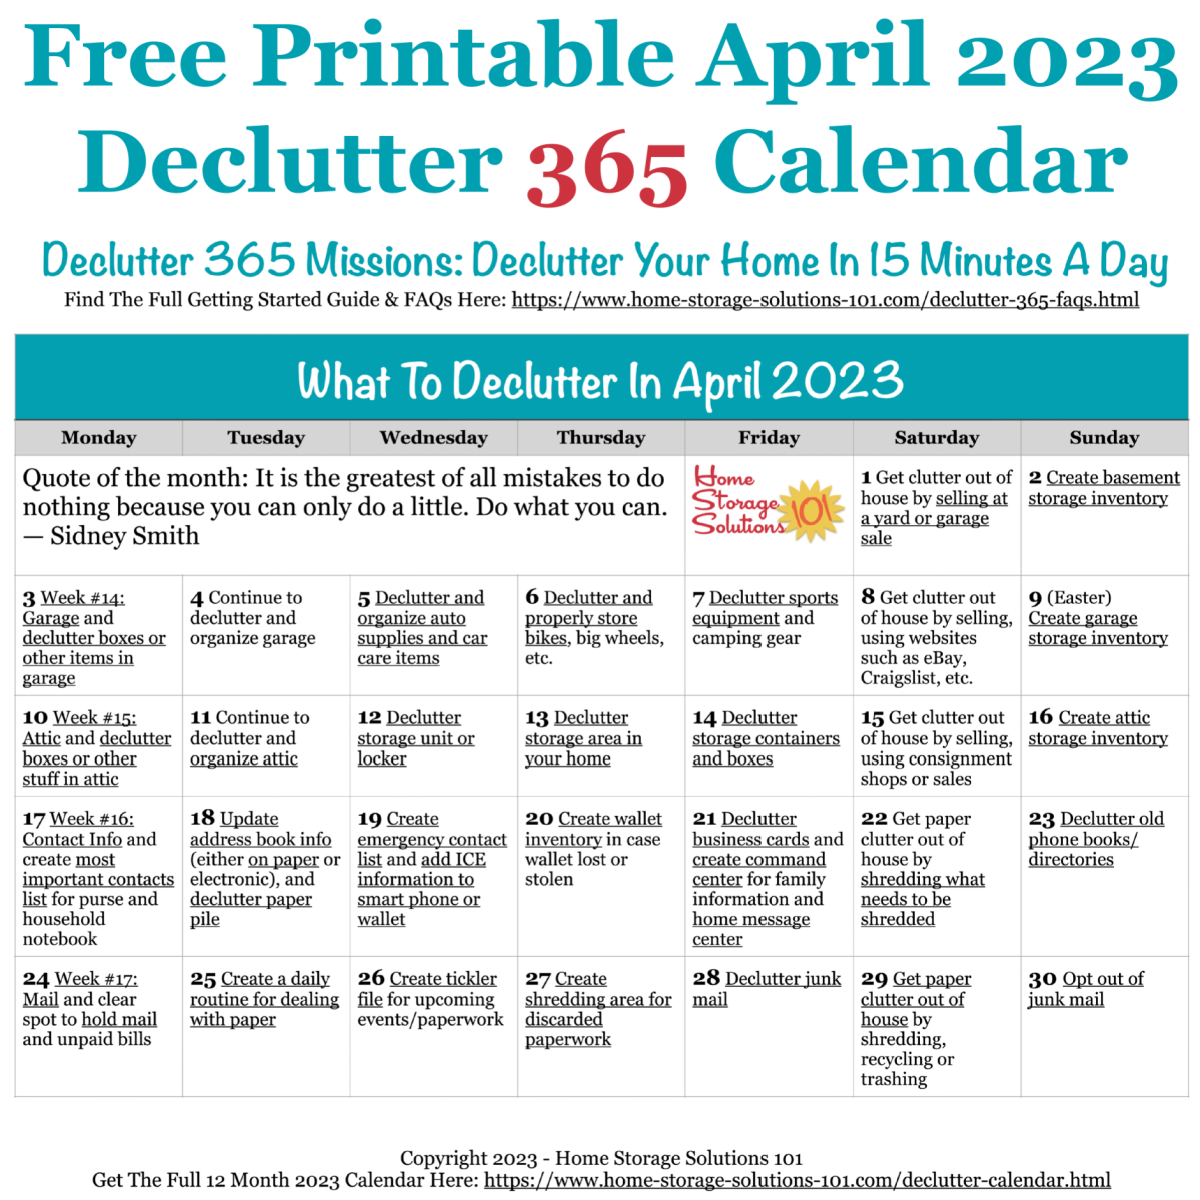 Free printable April 2023 #decluttering calendar with daily 15 minute missions. Follow the entire #Declutter365 plan provided by Home Storage Solutions 101 to #declutter your whole house in a year.